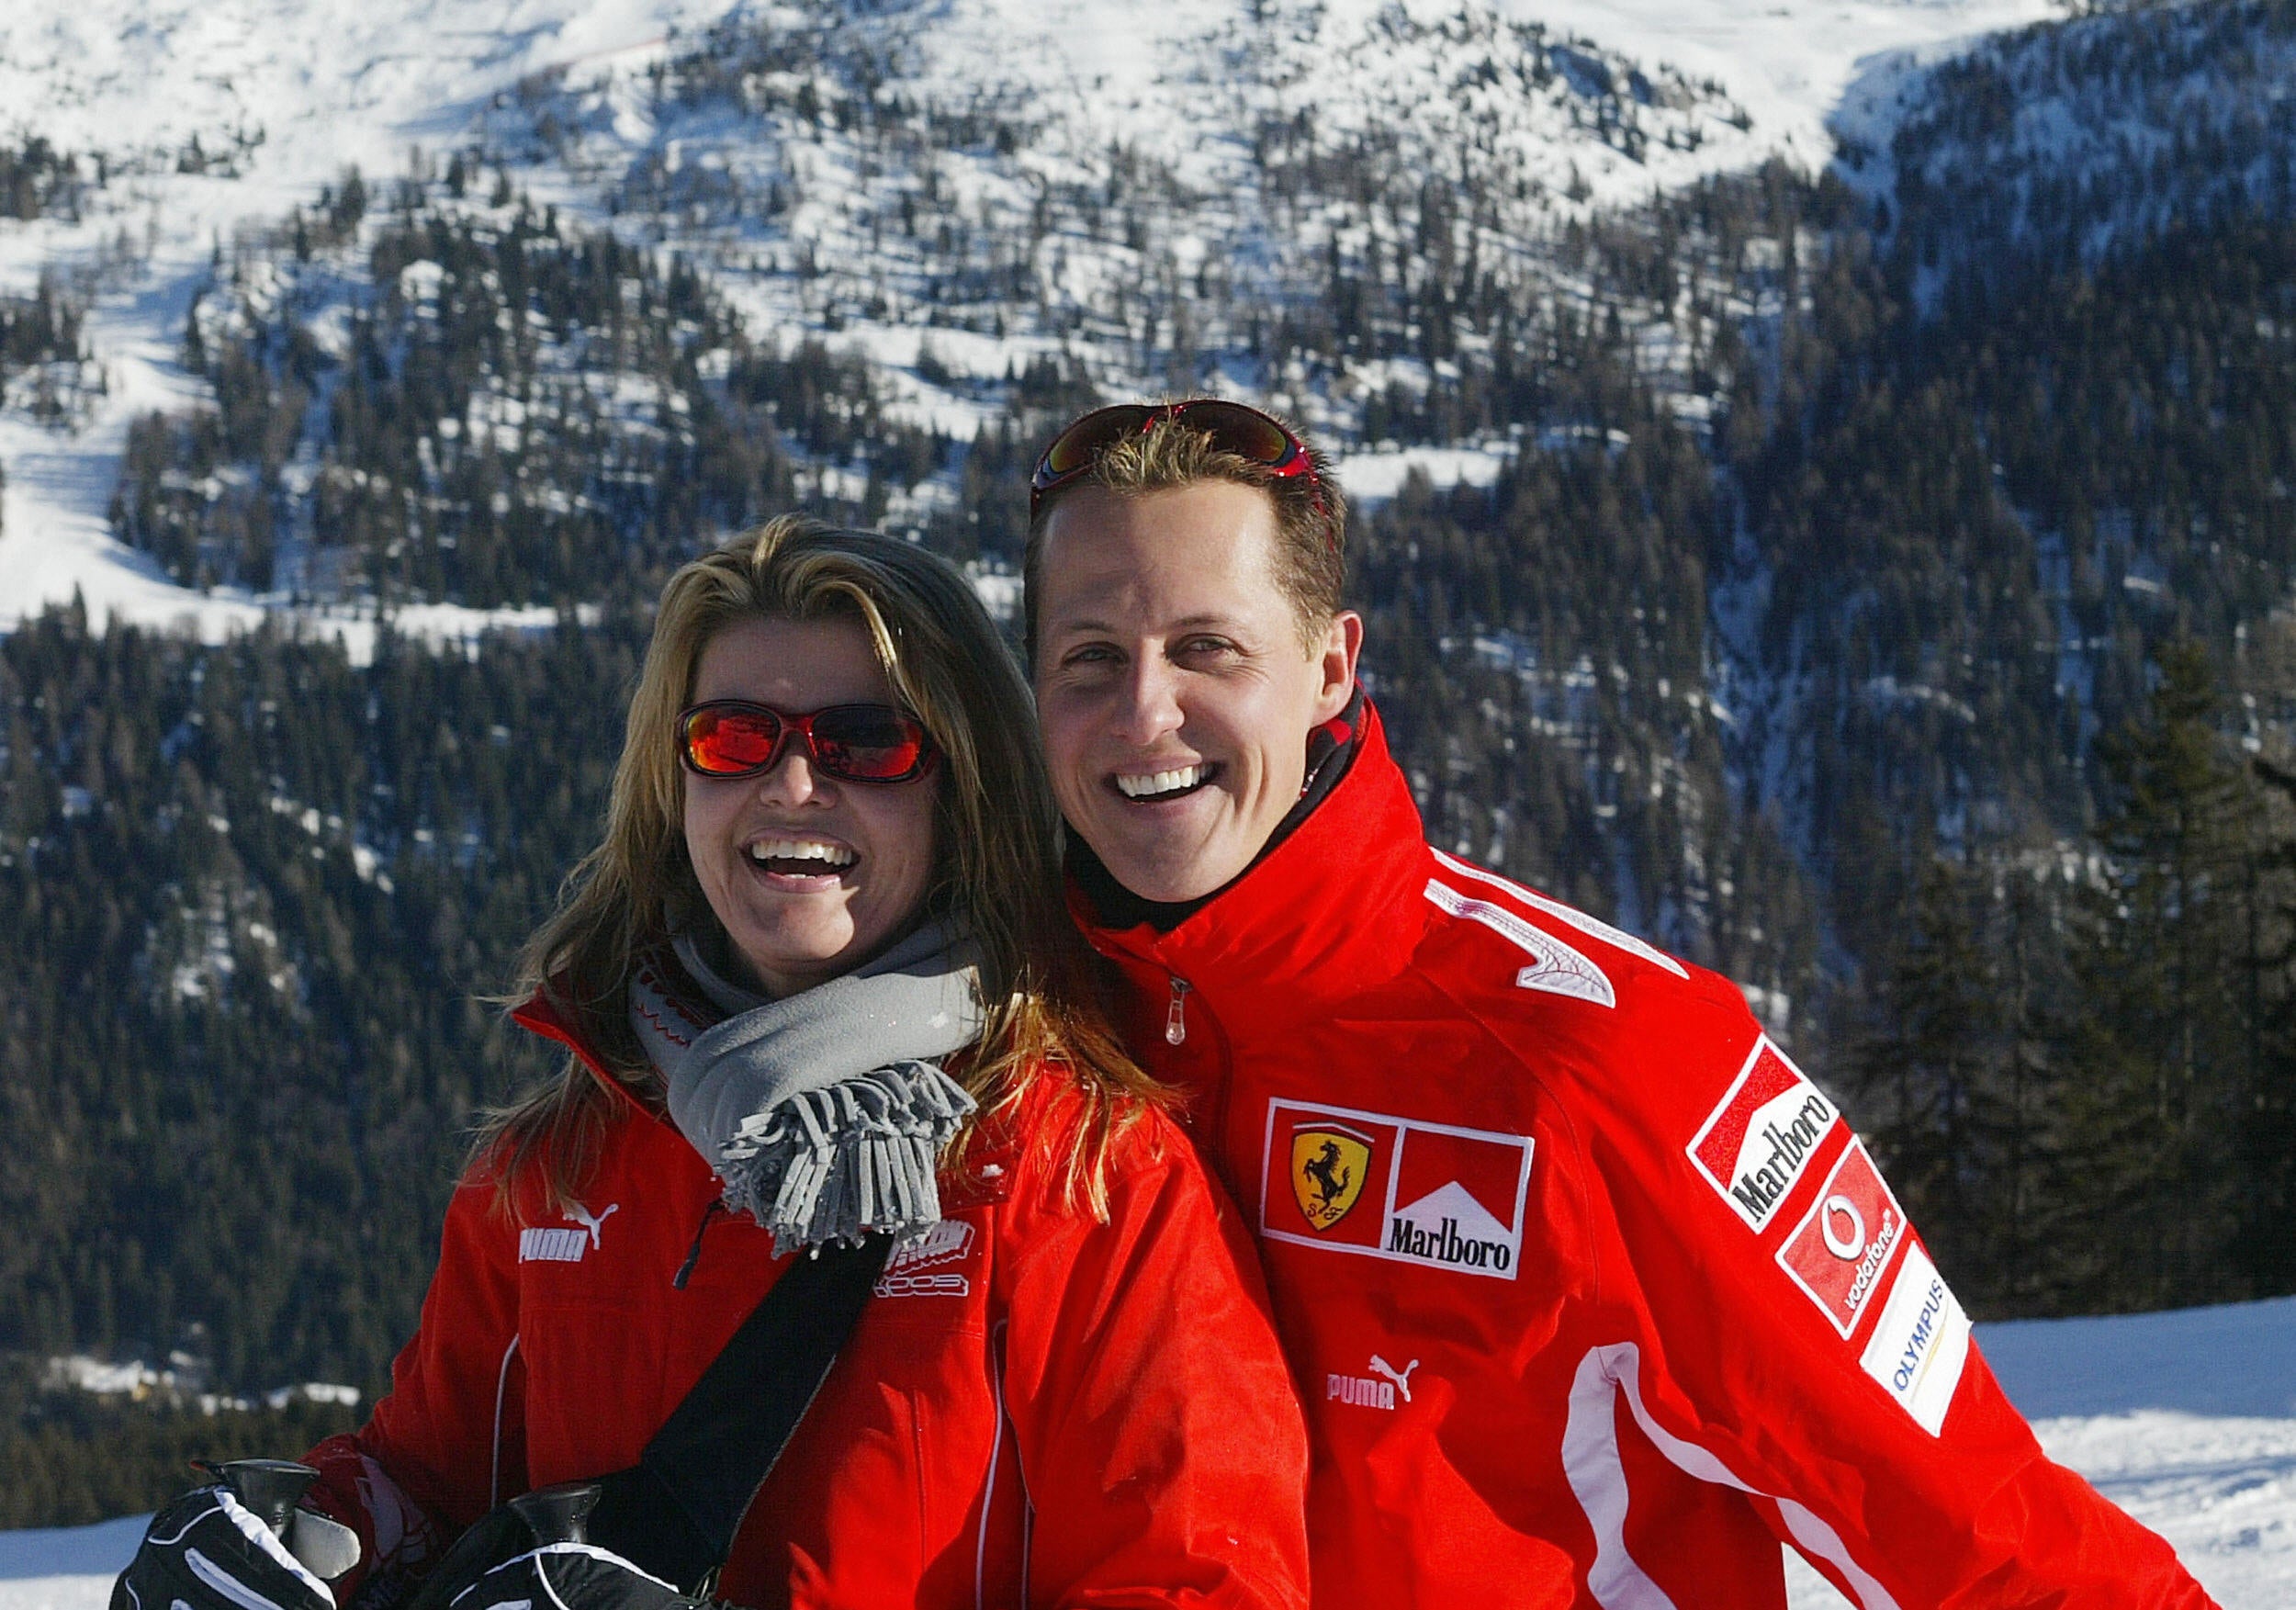 Schumacher’s wife Corinna (left) has insisted on protecting the F1’s icon privacy after his near-fatal skiing accident